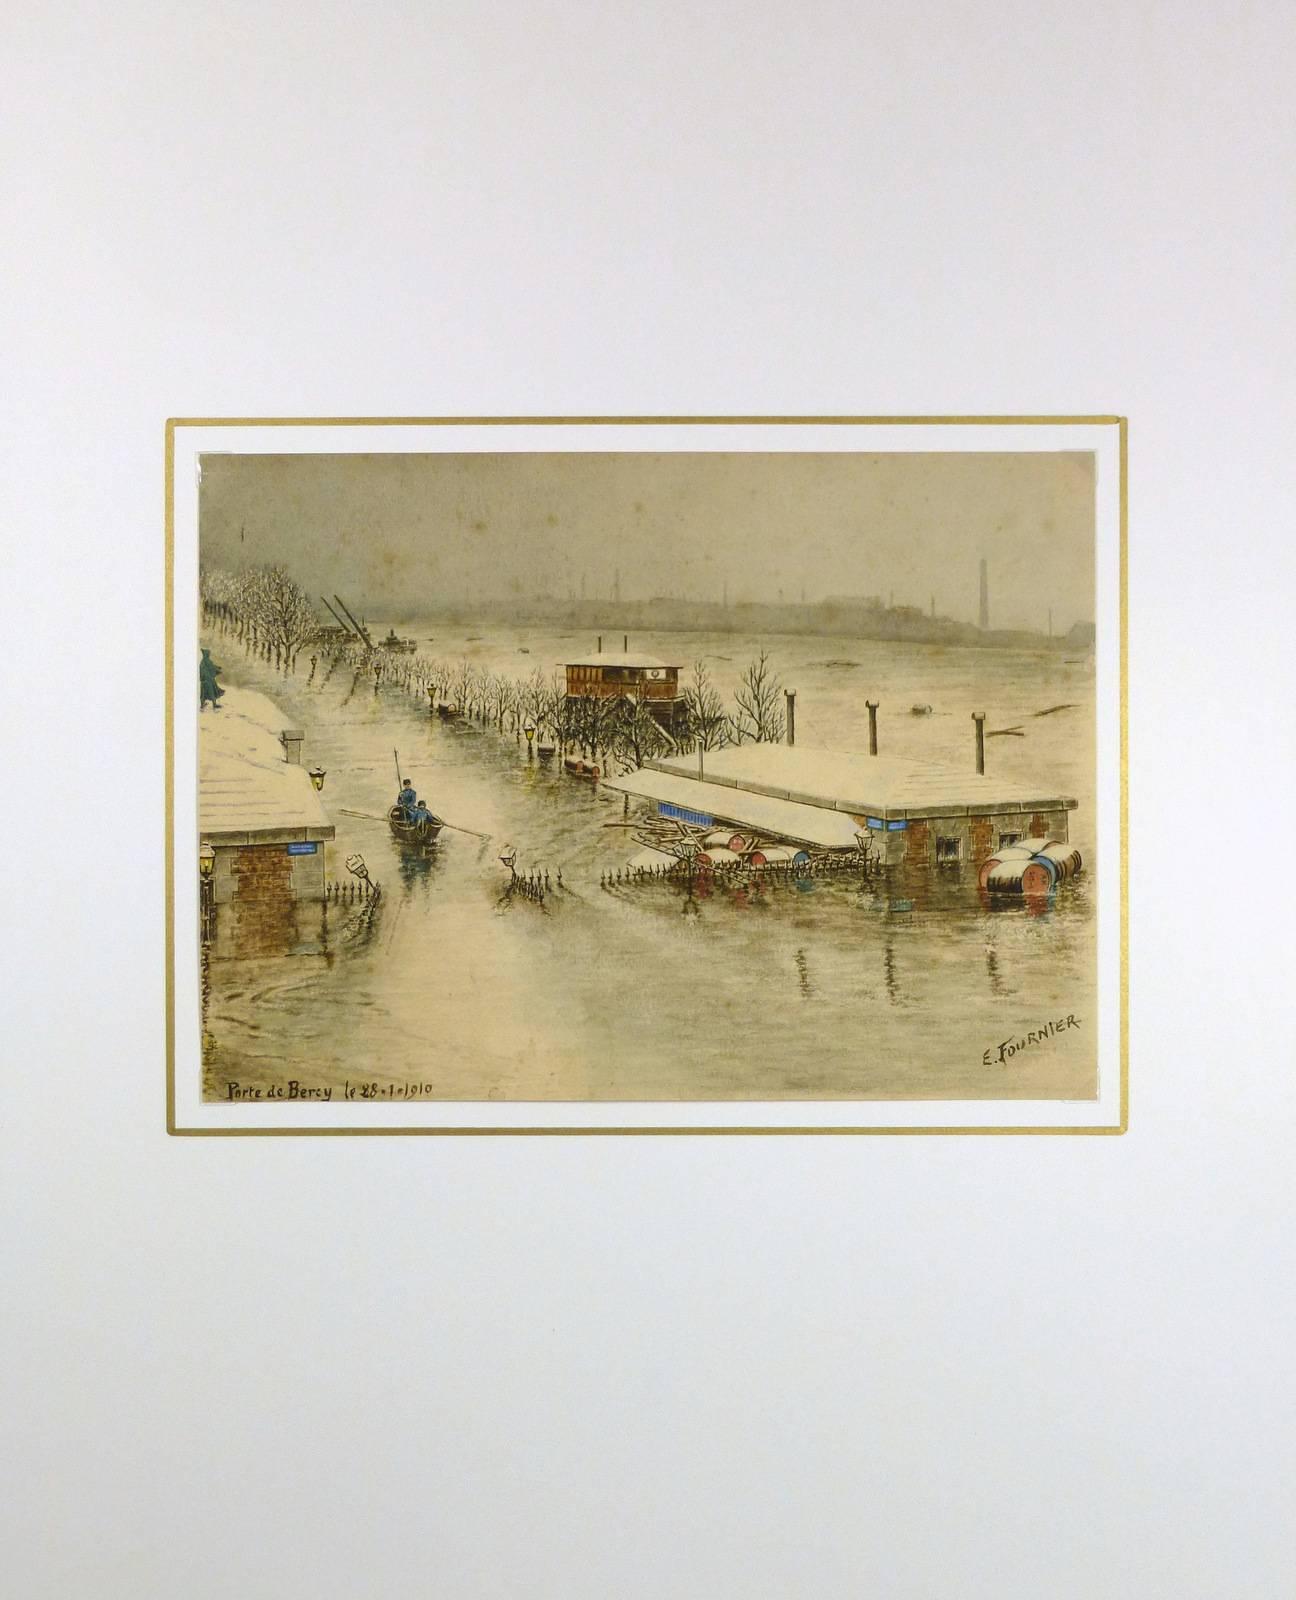 Stunning watercolor of the flood at the Porte de Bercy in Paris by French artist E. Fournier, 1910. Signed lower right.  

Original artwork on paper displayed on a white mat with a gold border. Mat fits a standard-size frame.  Archival plastic